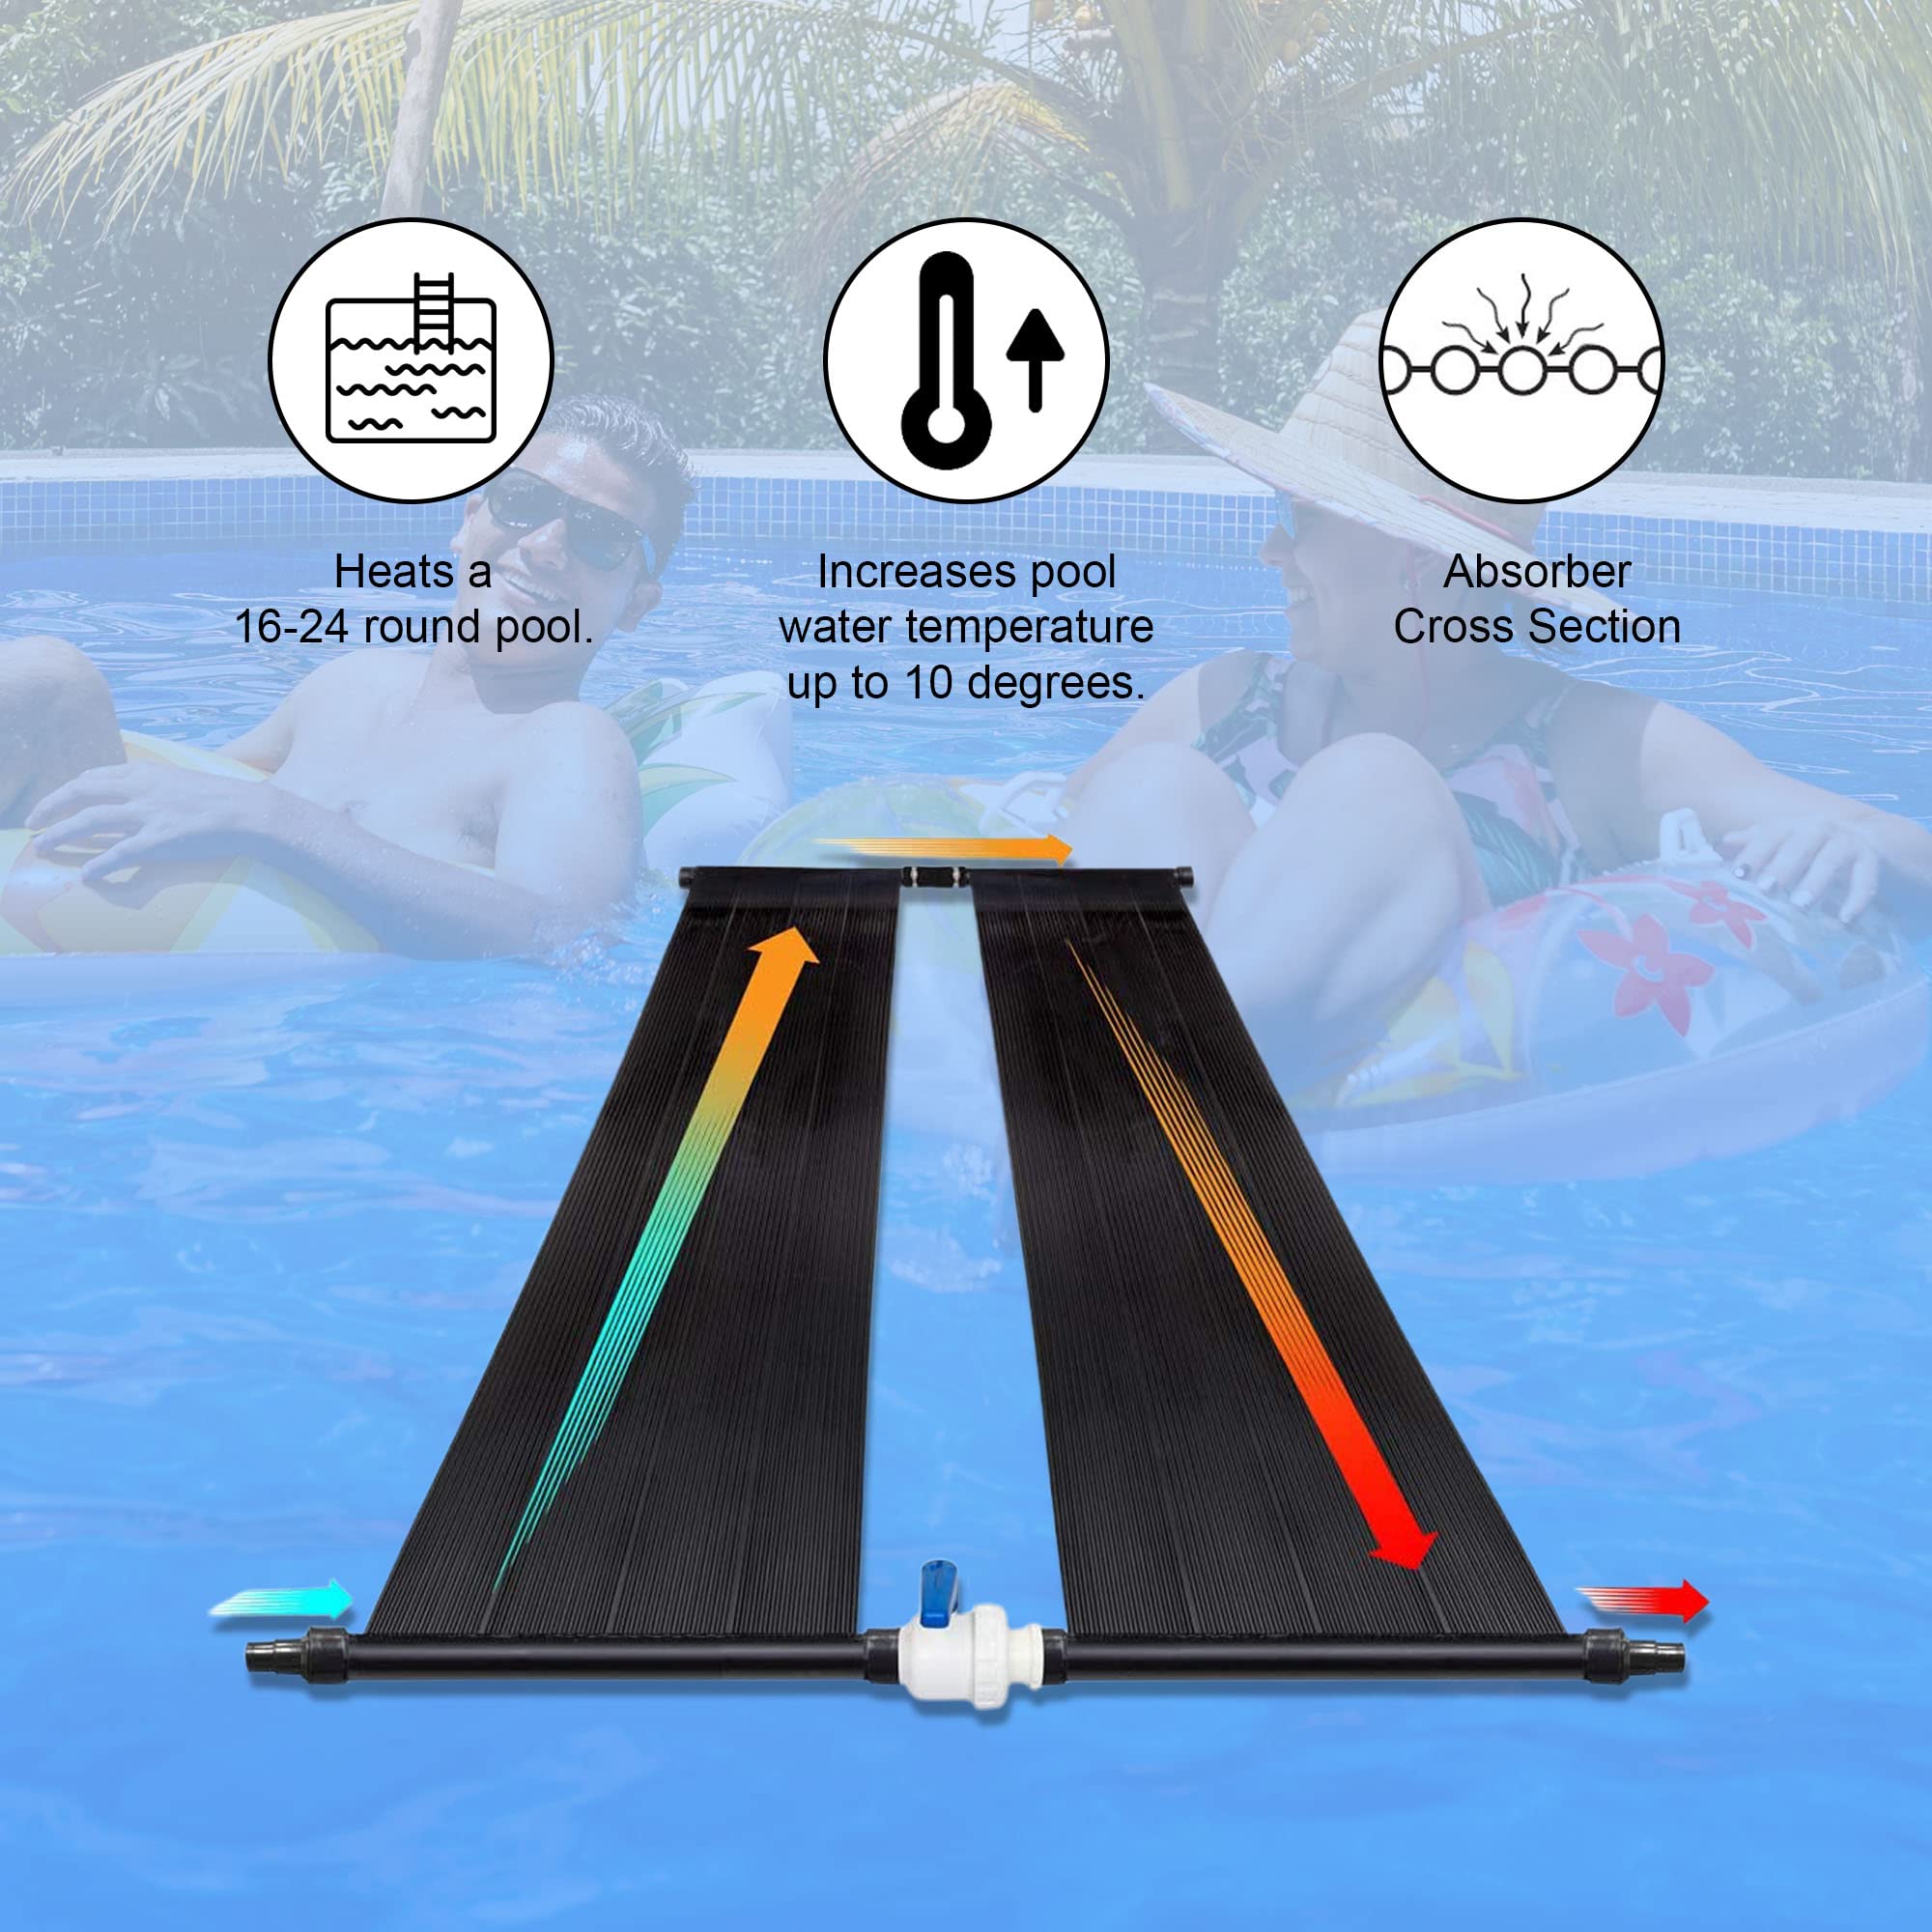 SunQuest Solar Swimming Pool Heaters - 2 Solar Hot Water Heater Panels w/Max-Flow Design - Swimming Pool Accessories for Above Ground Pools (2' x 20', 2 Count + Couplers + Integrated Diverter Valve)